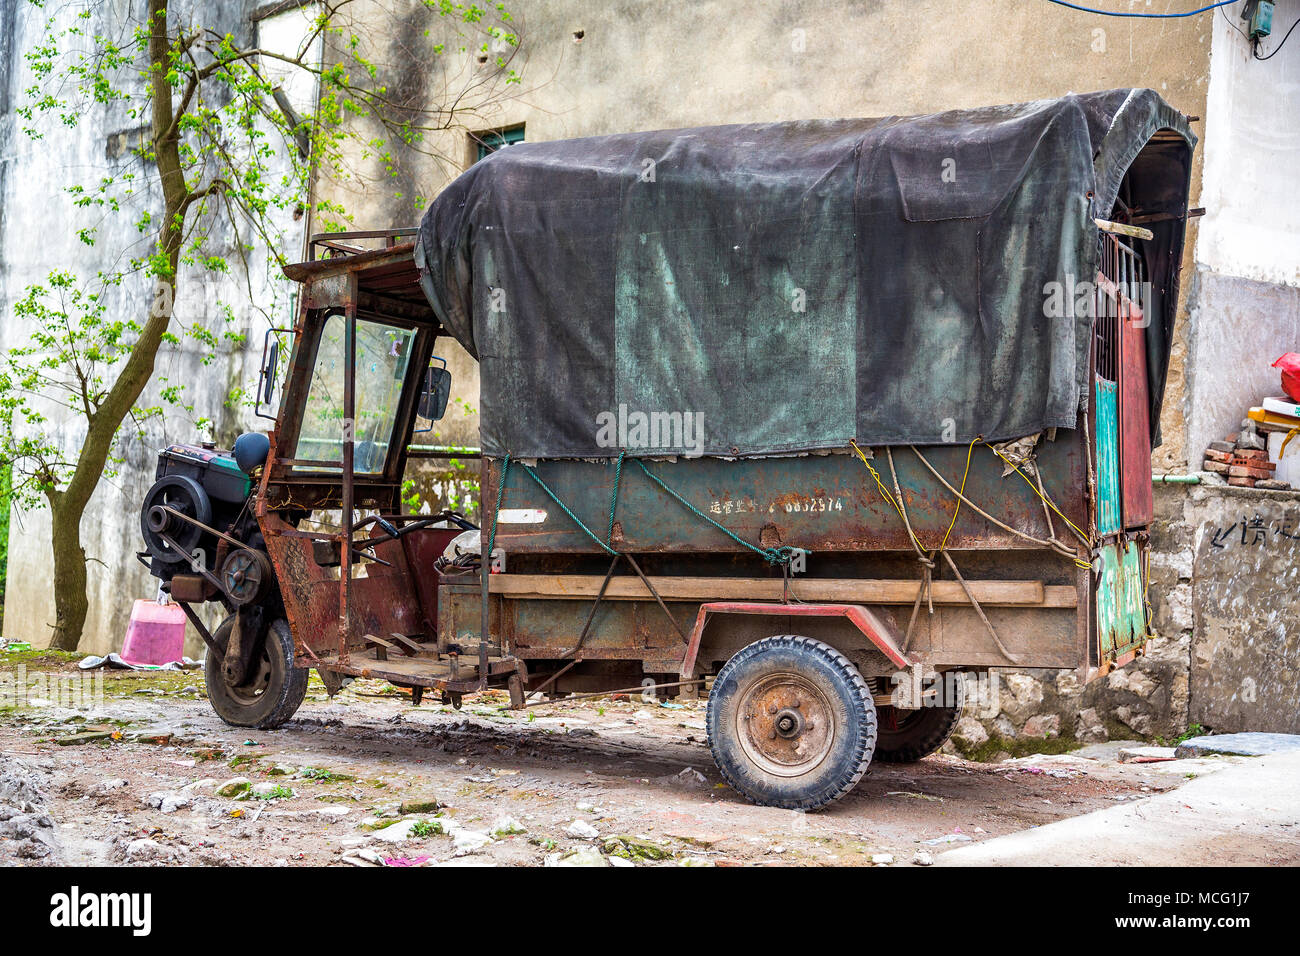 An old three wheeled truck with exposed engine and drive belt. The rear of the truck is covered with a tarpaulin. Daxu, China. Stock Photo